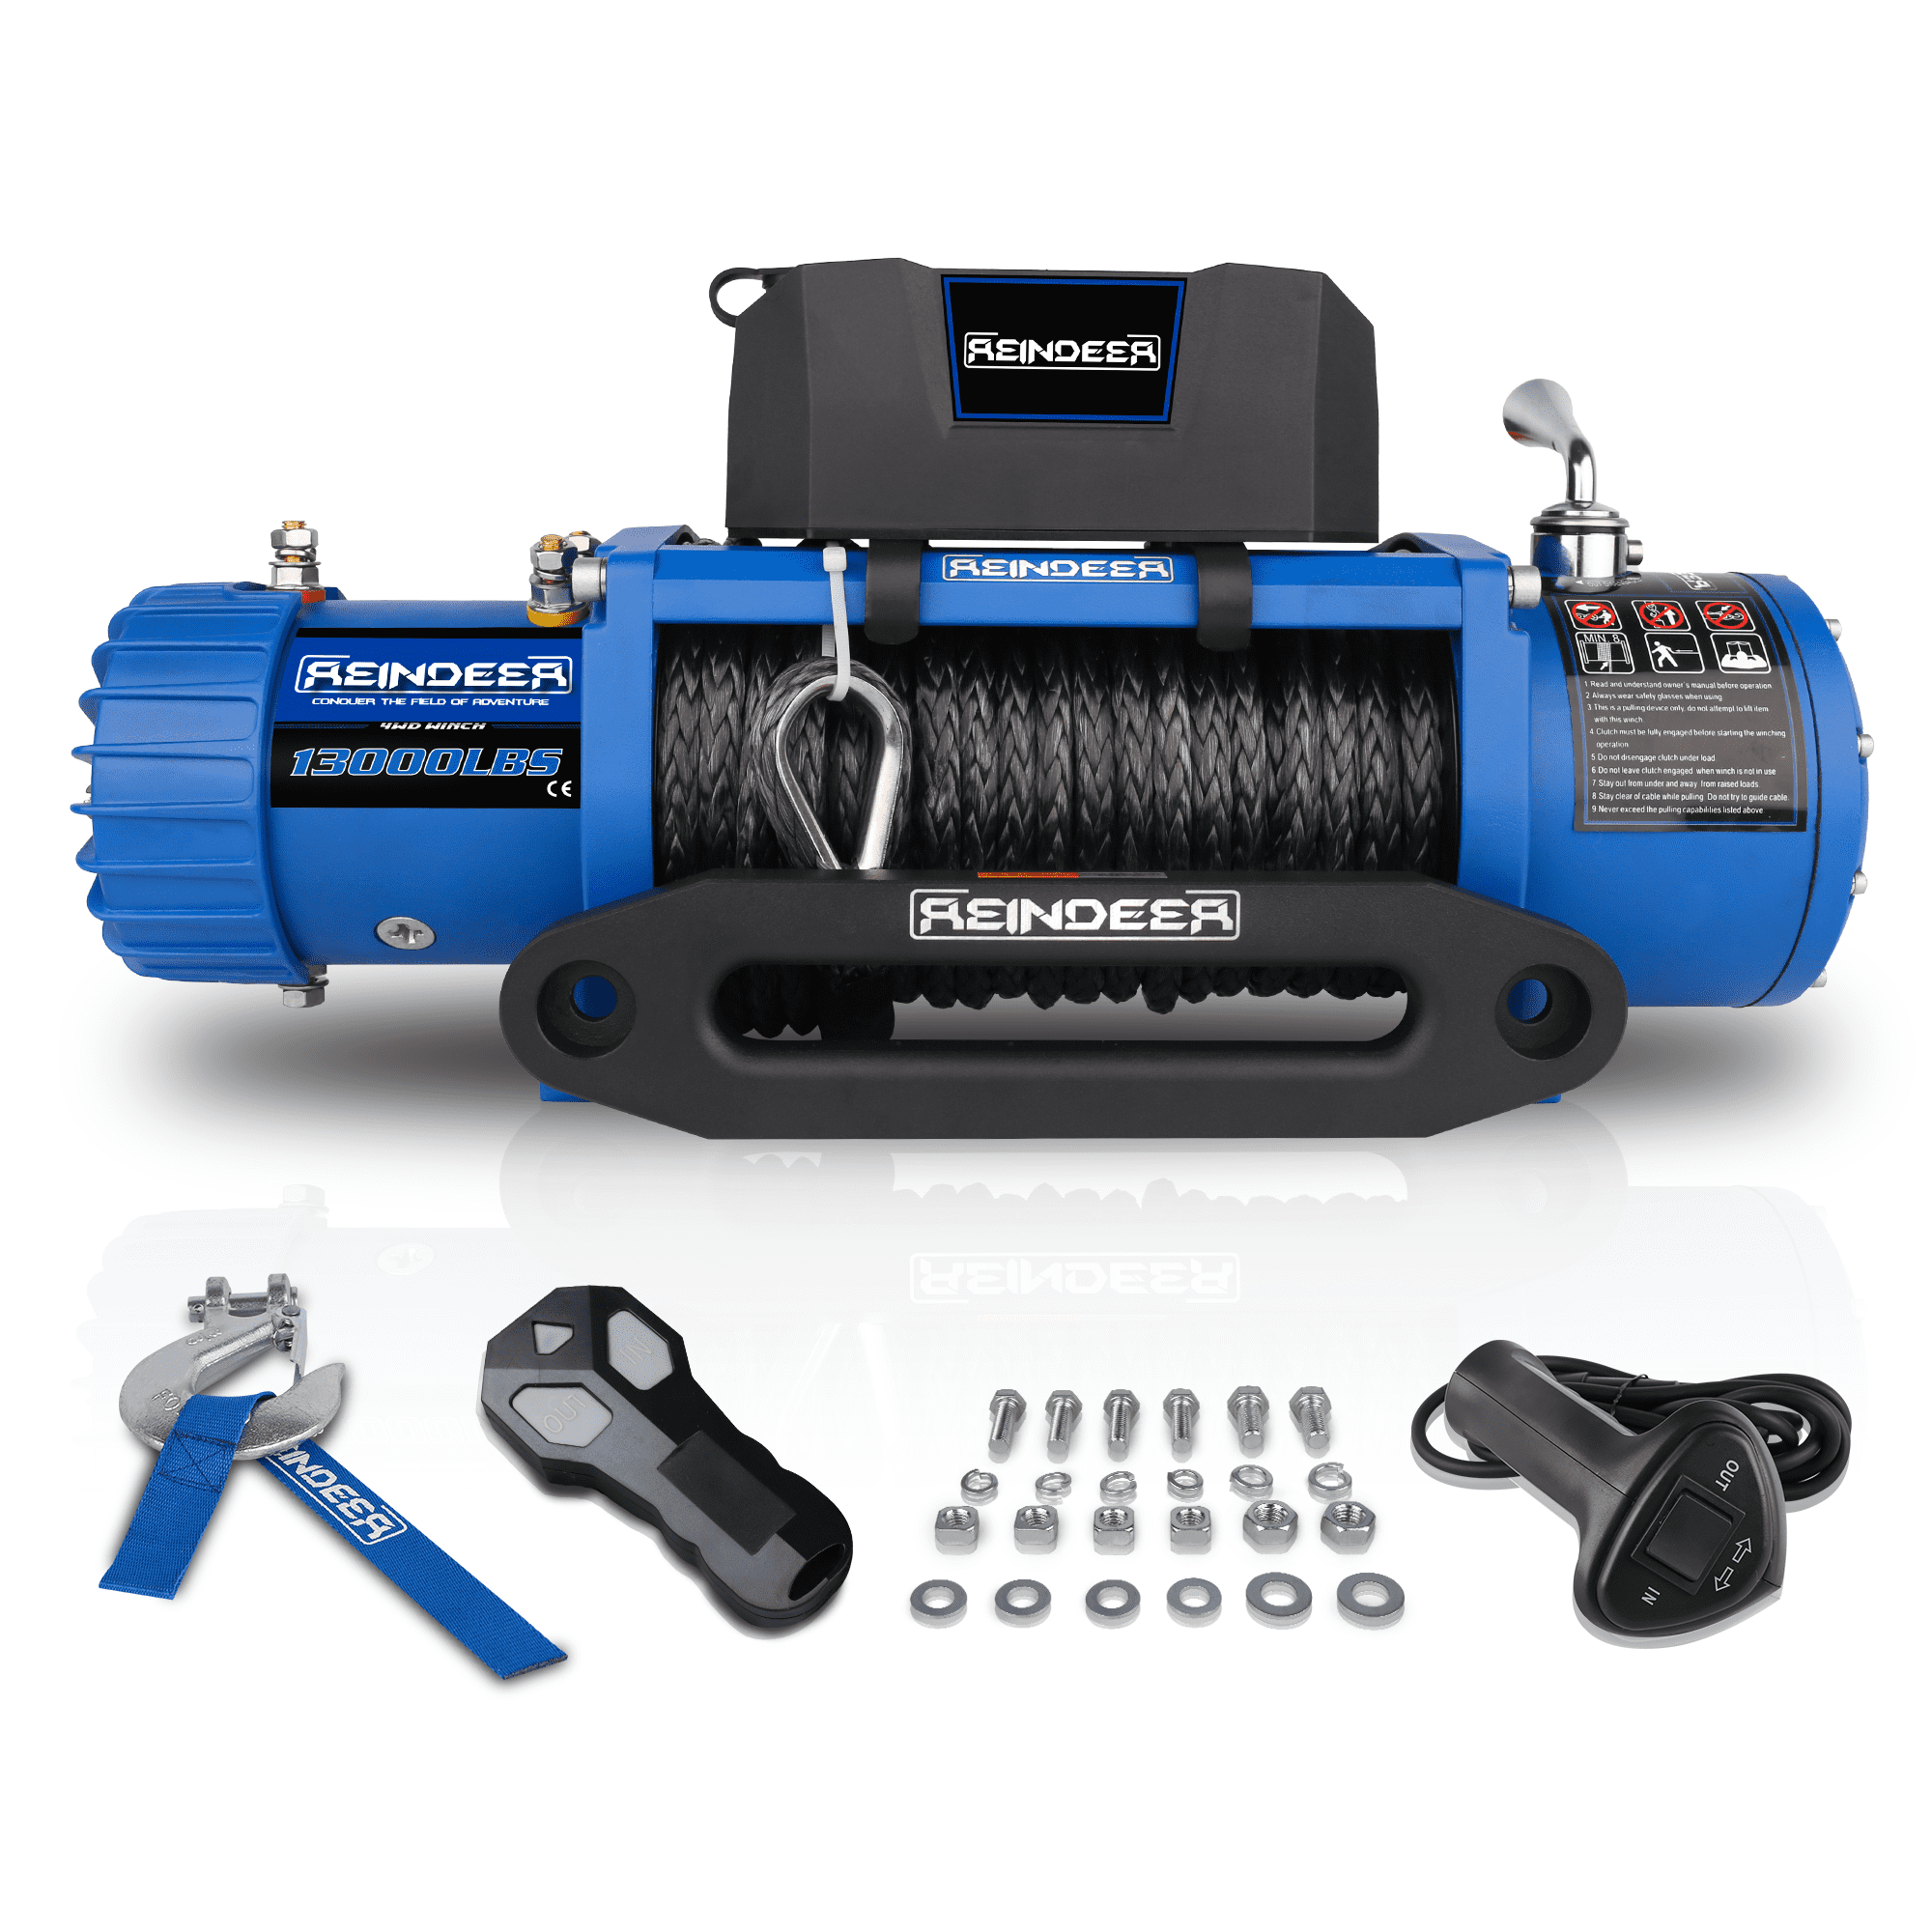 OPENROAD Waterproof 12V Synthetic Rope Electric Jeep Truck Winch 13000 lb.Load Capacity 